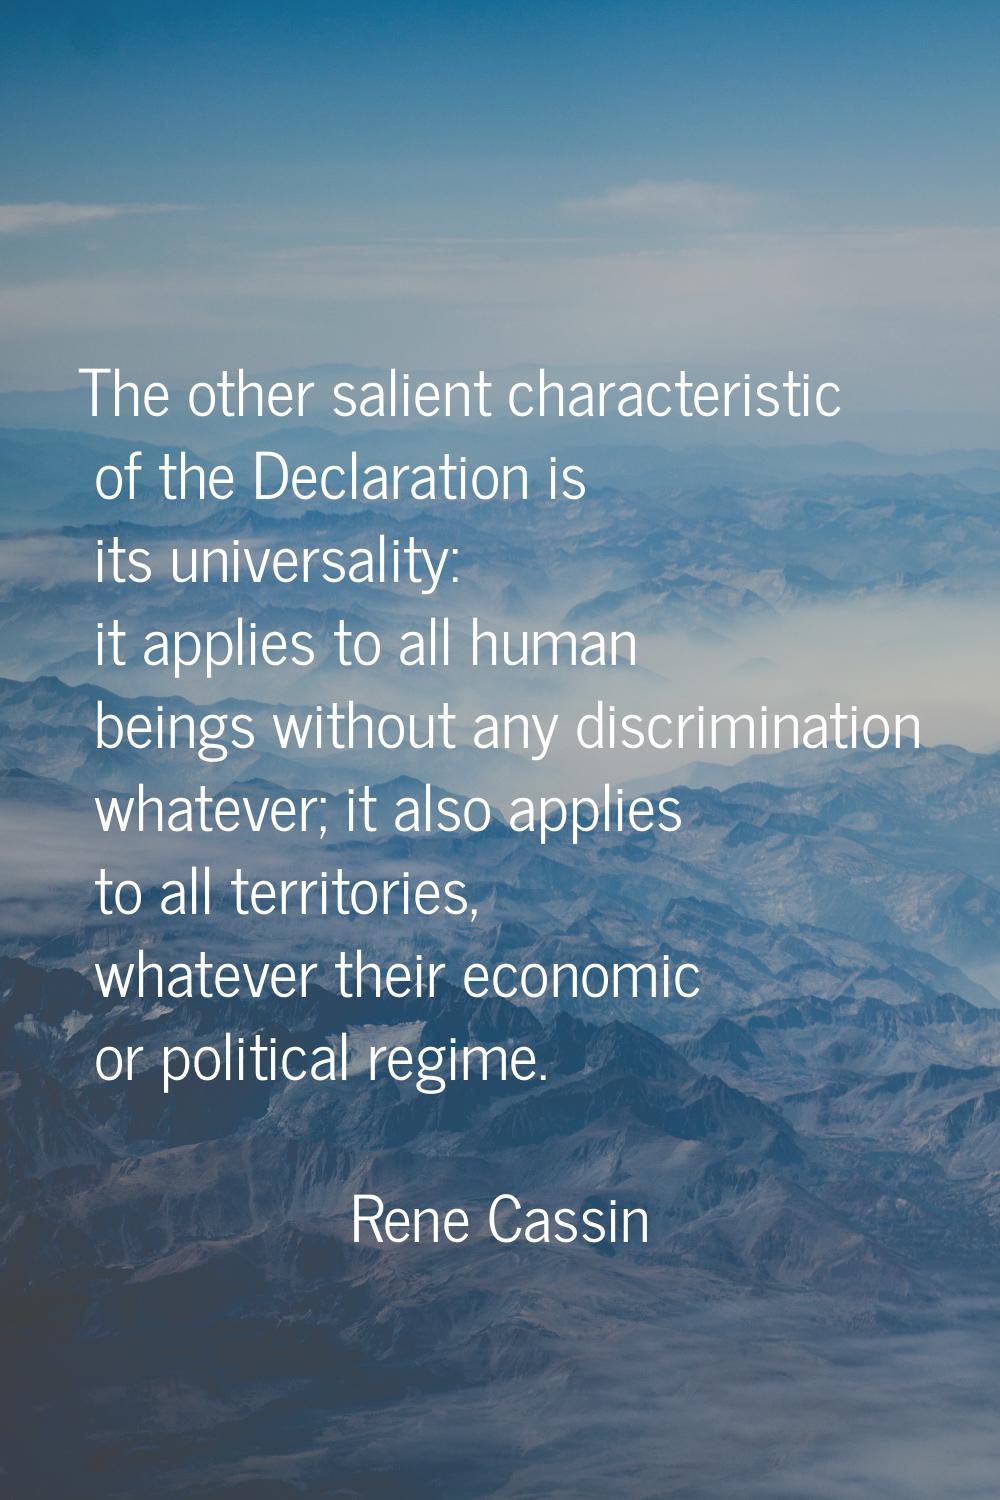 The other salient characteristic of the Declaration is its universality: it applies to all human be